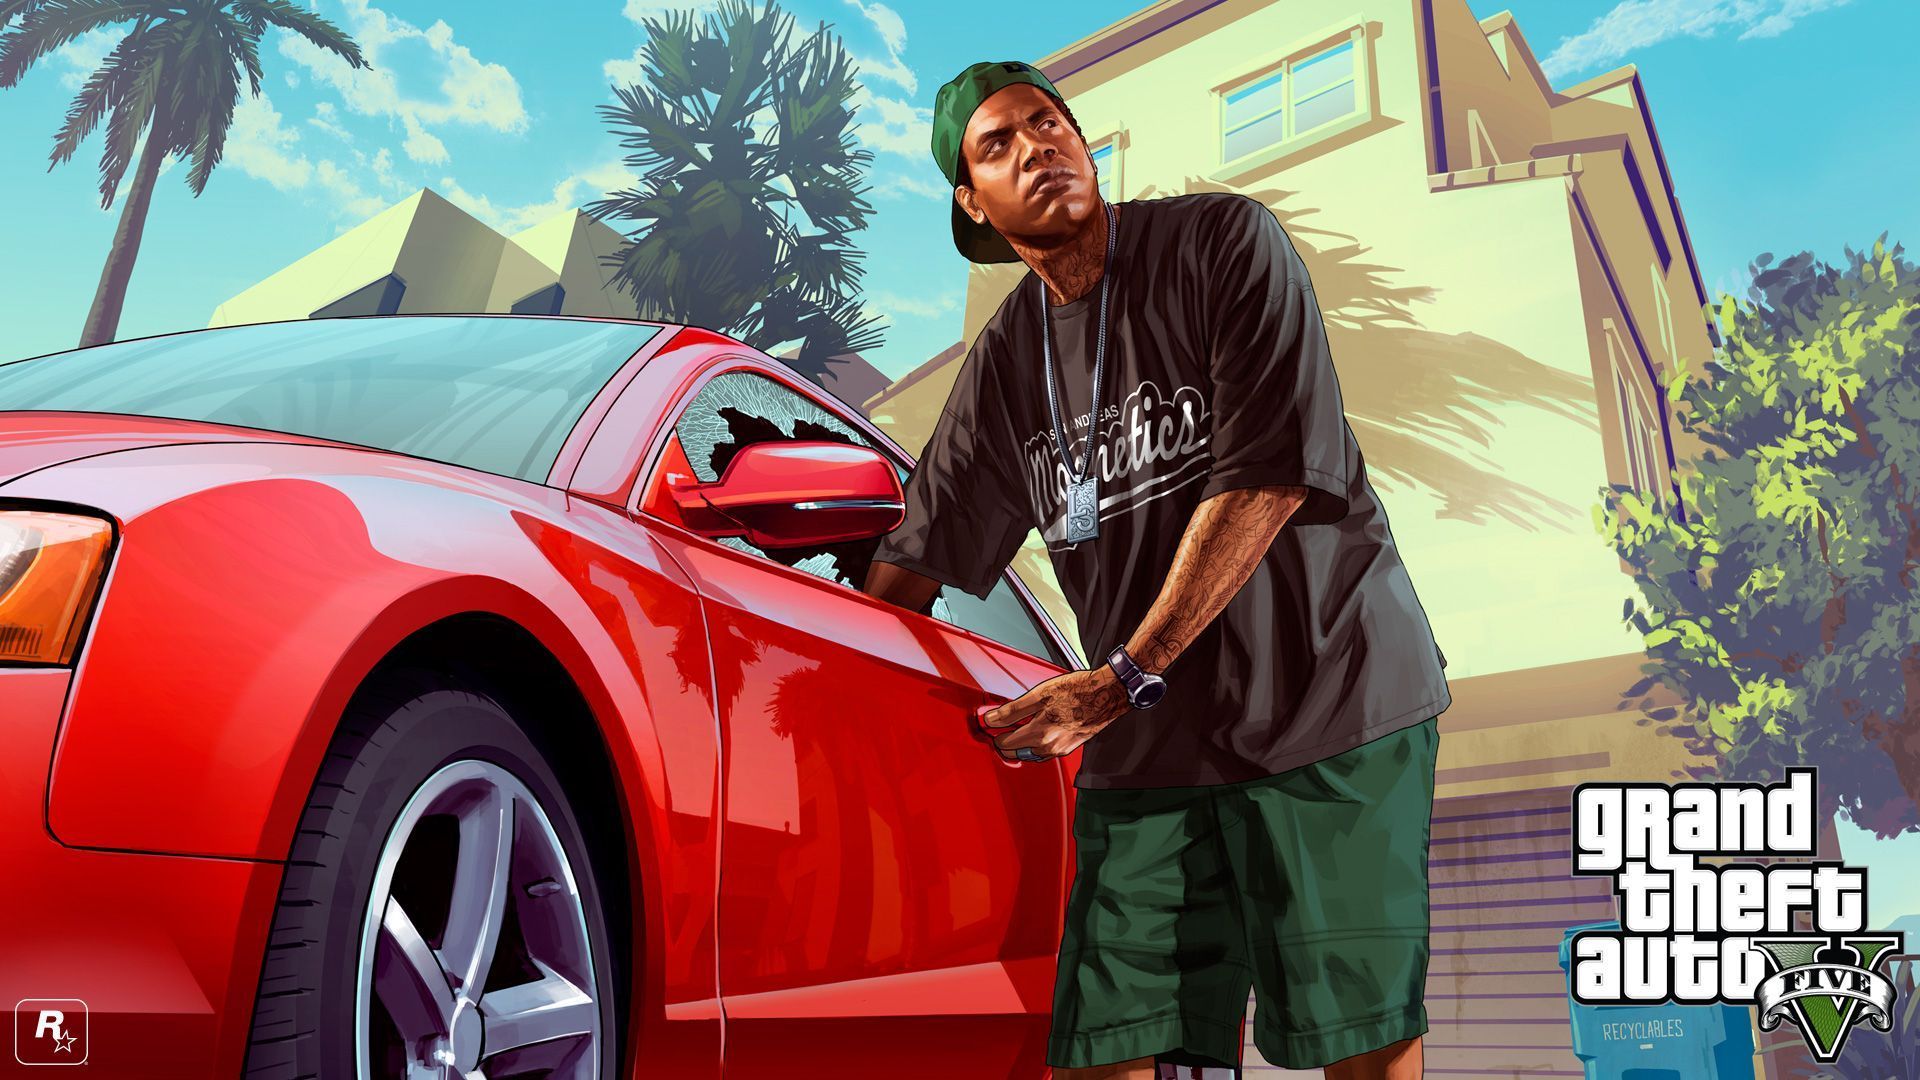 Grand theft auto 5 hd wallpapers